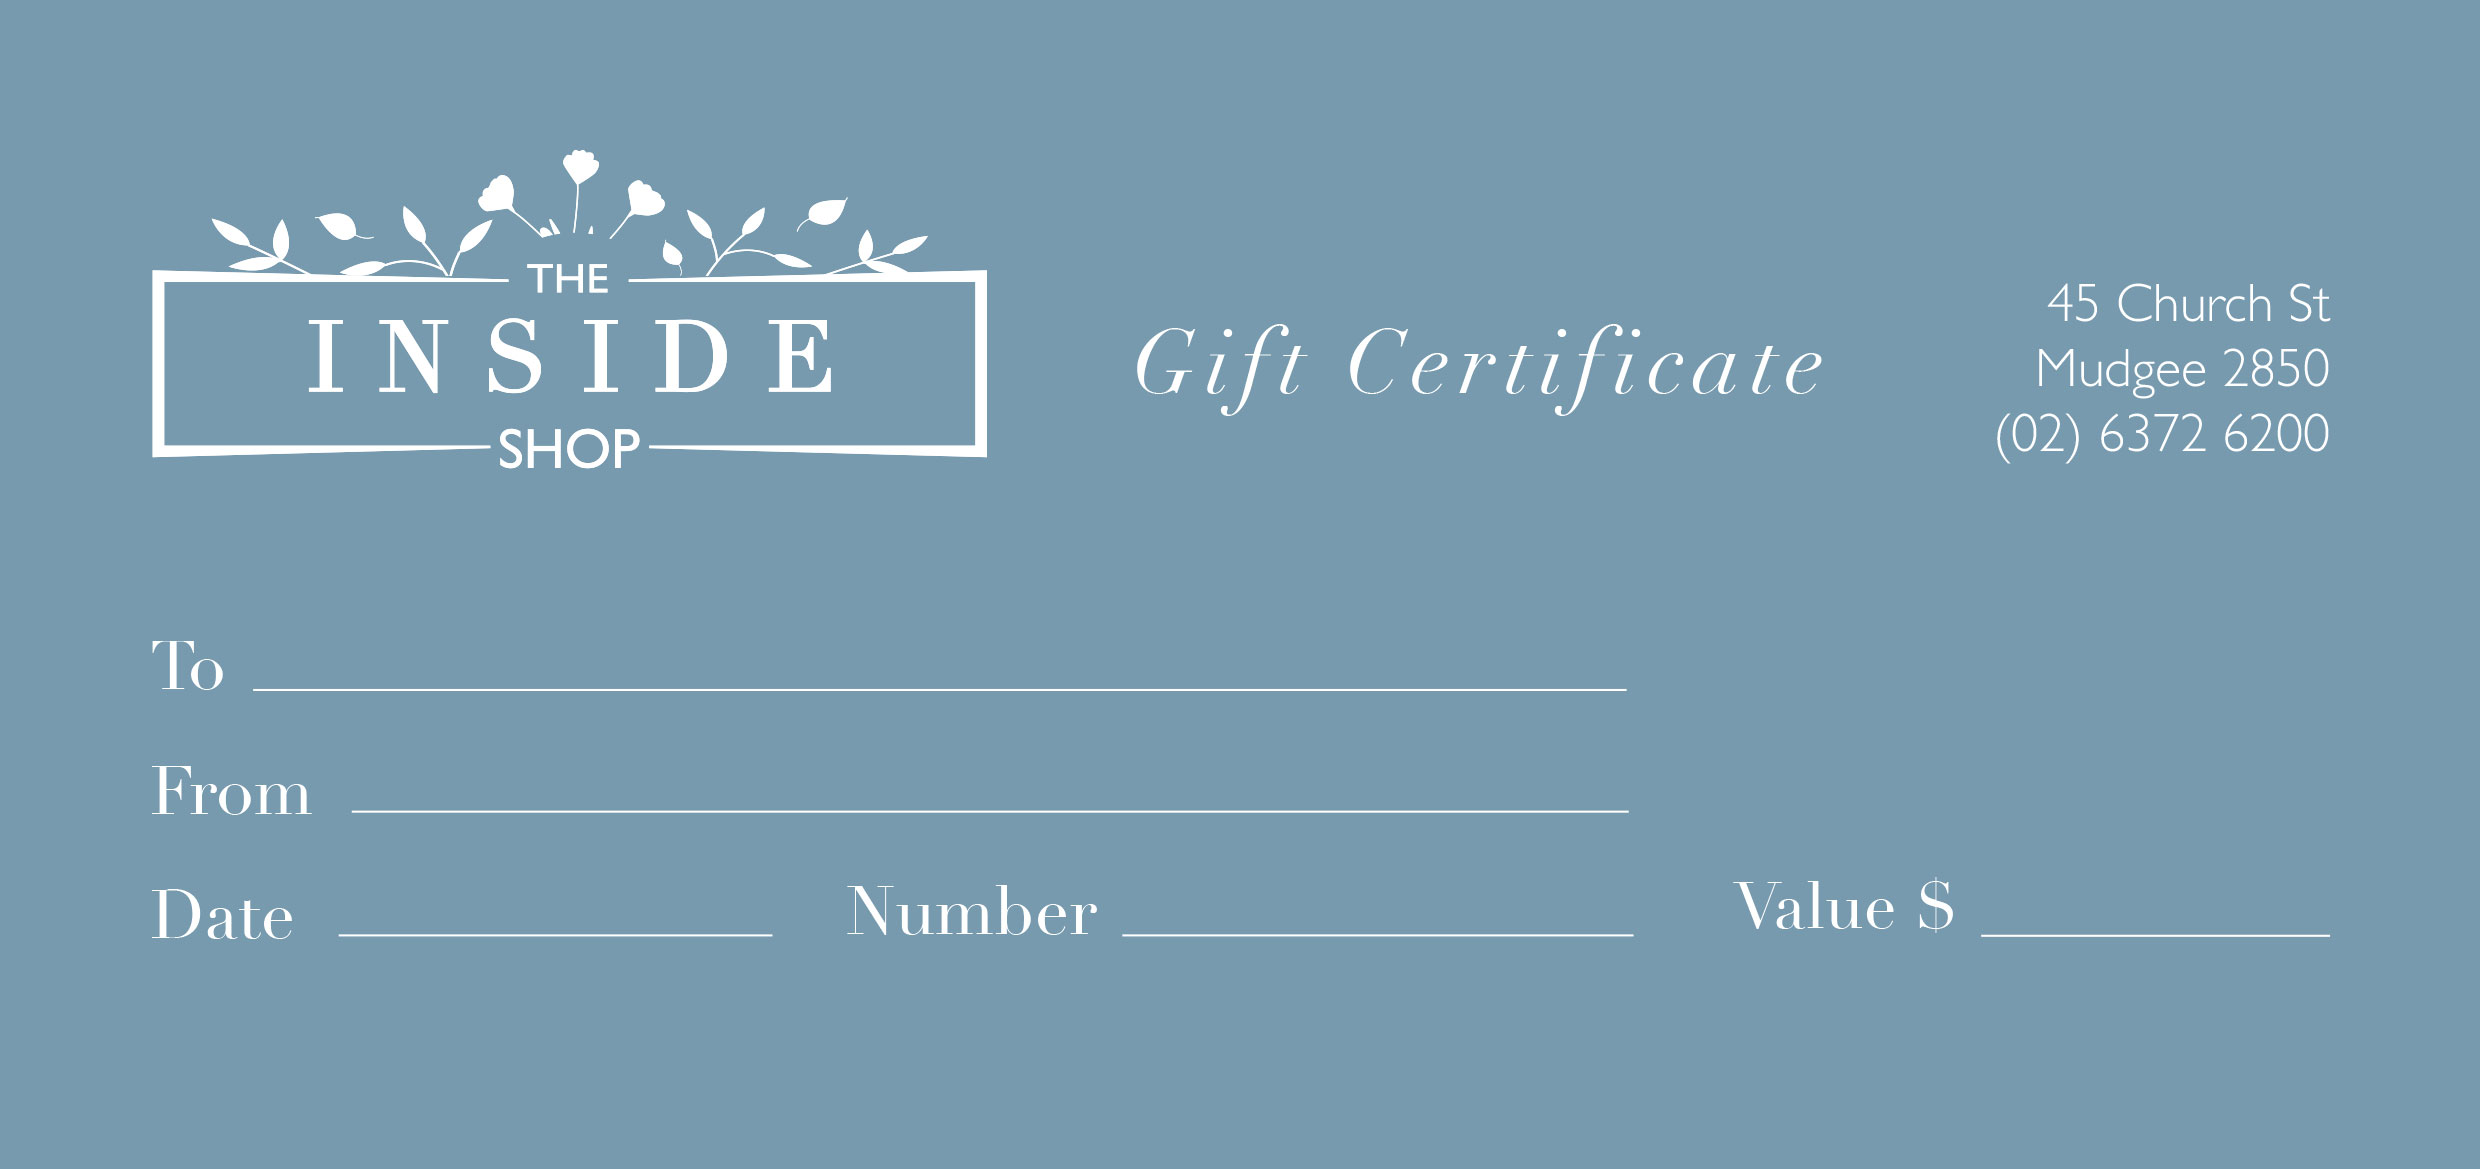 The Inside Shop Gift Certificate